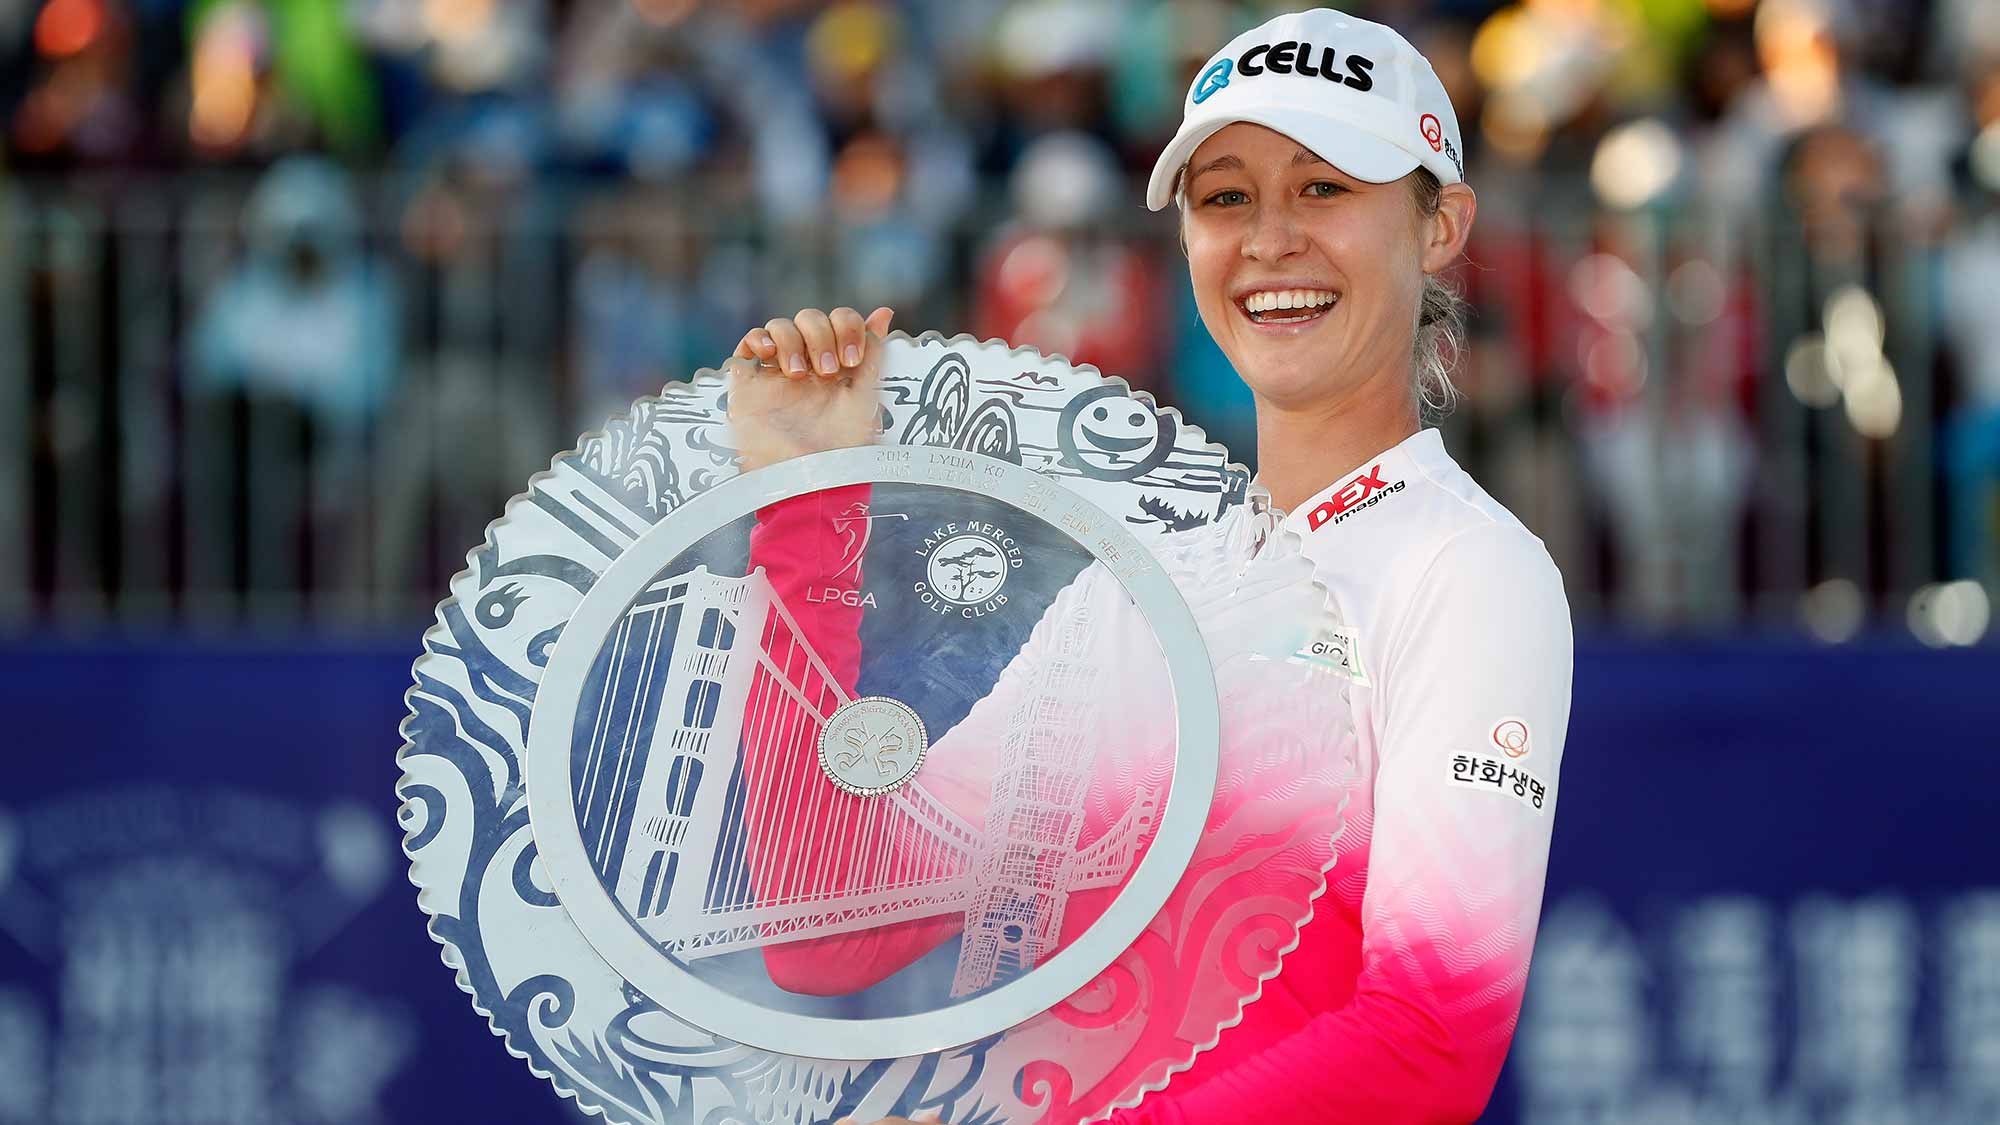 Nelly Korda poses with her trophy on the 18th green after winning the Swinging Skirts LPGA Taiwan Championship at Ta Shee Golf & Country Club on October 28, 2018 in Taoyuan, Chinese Taipei